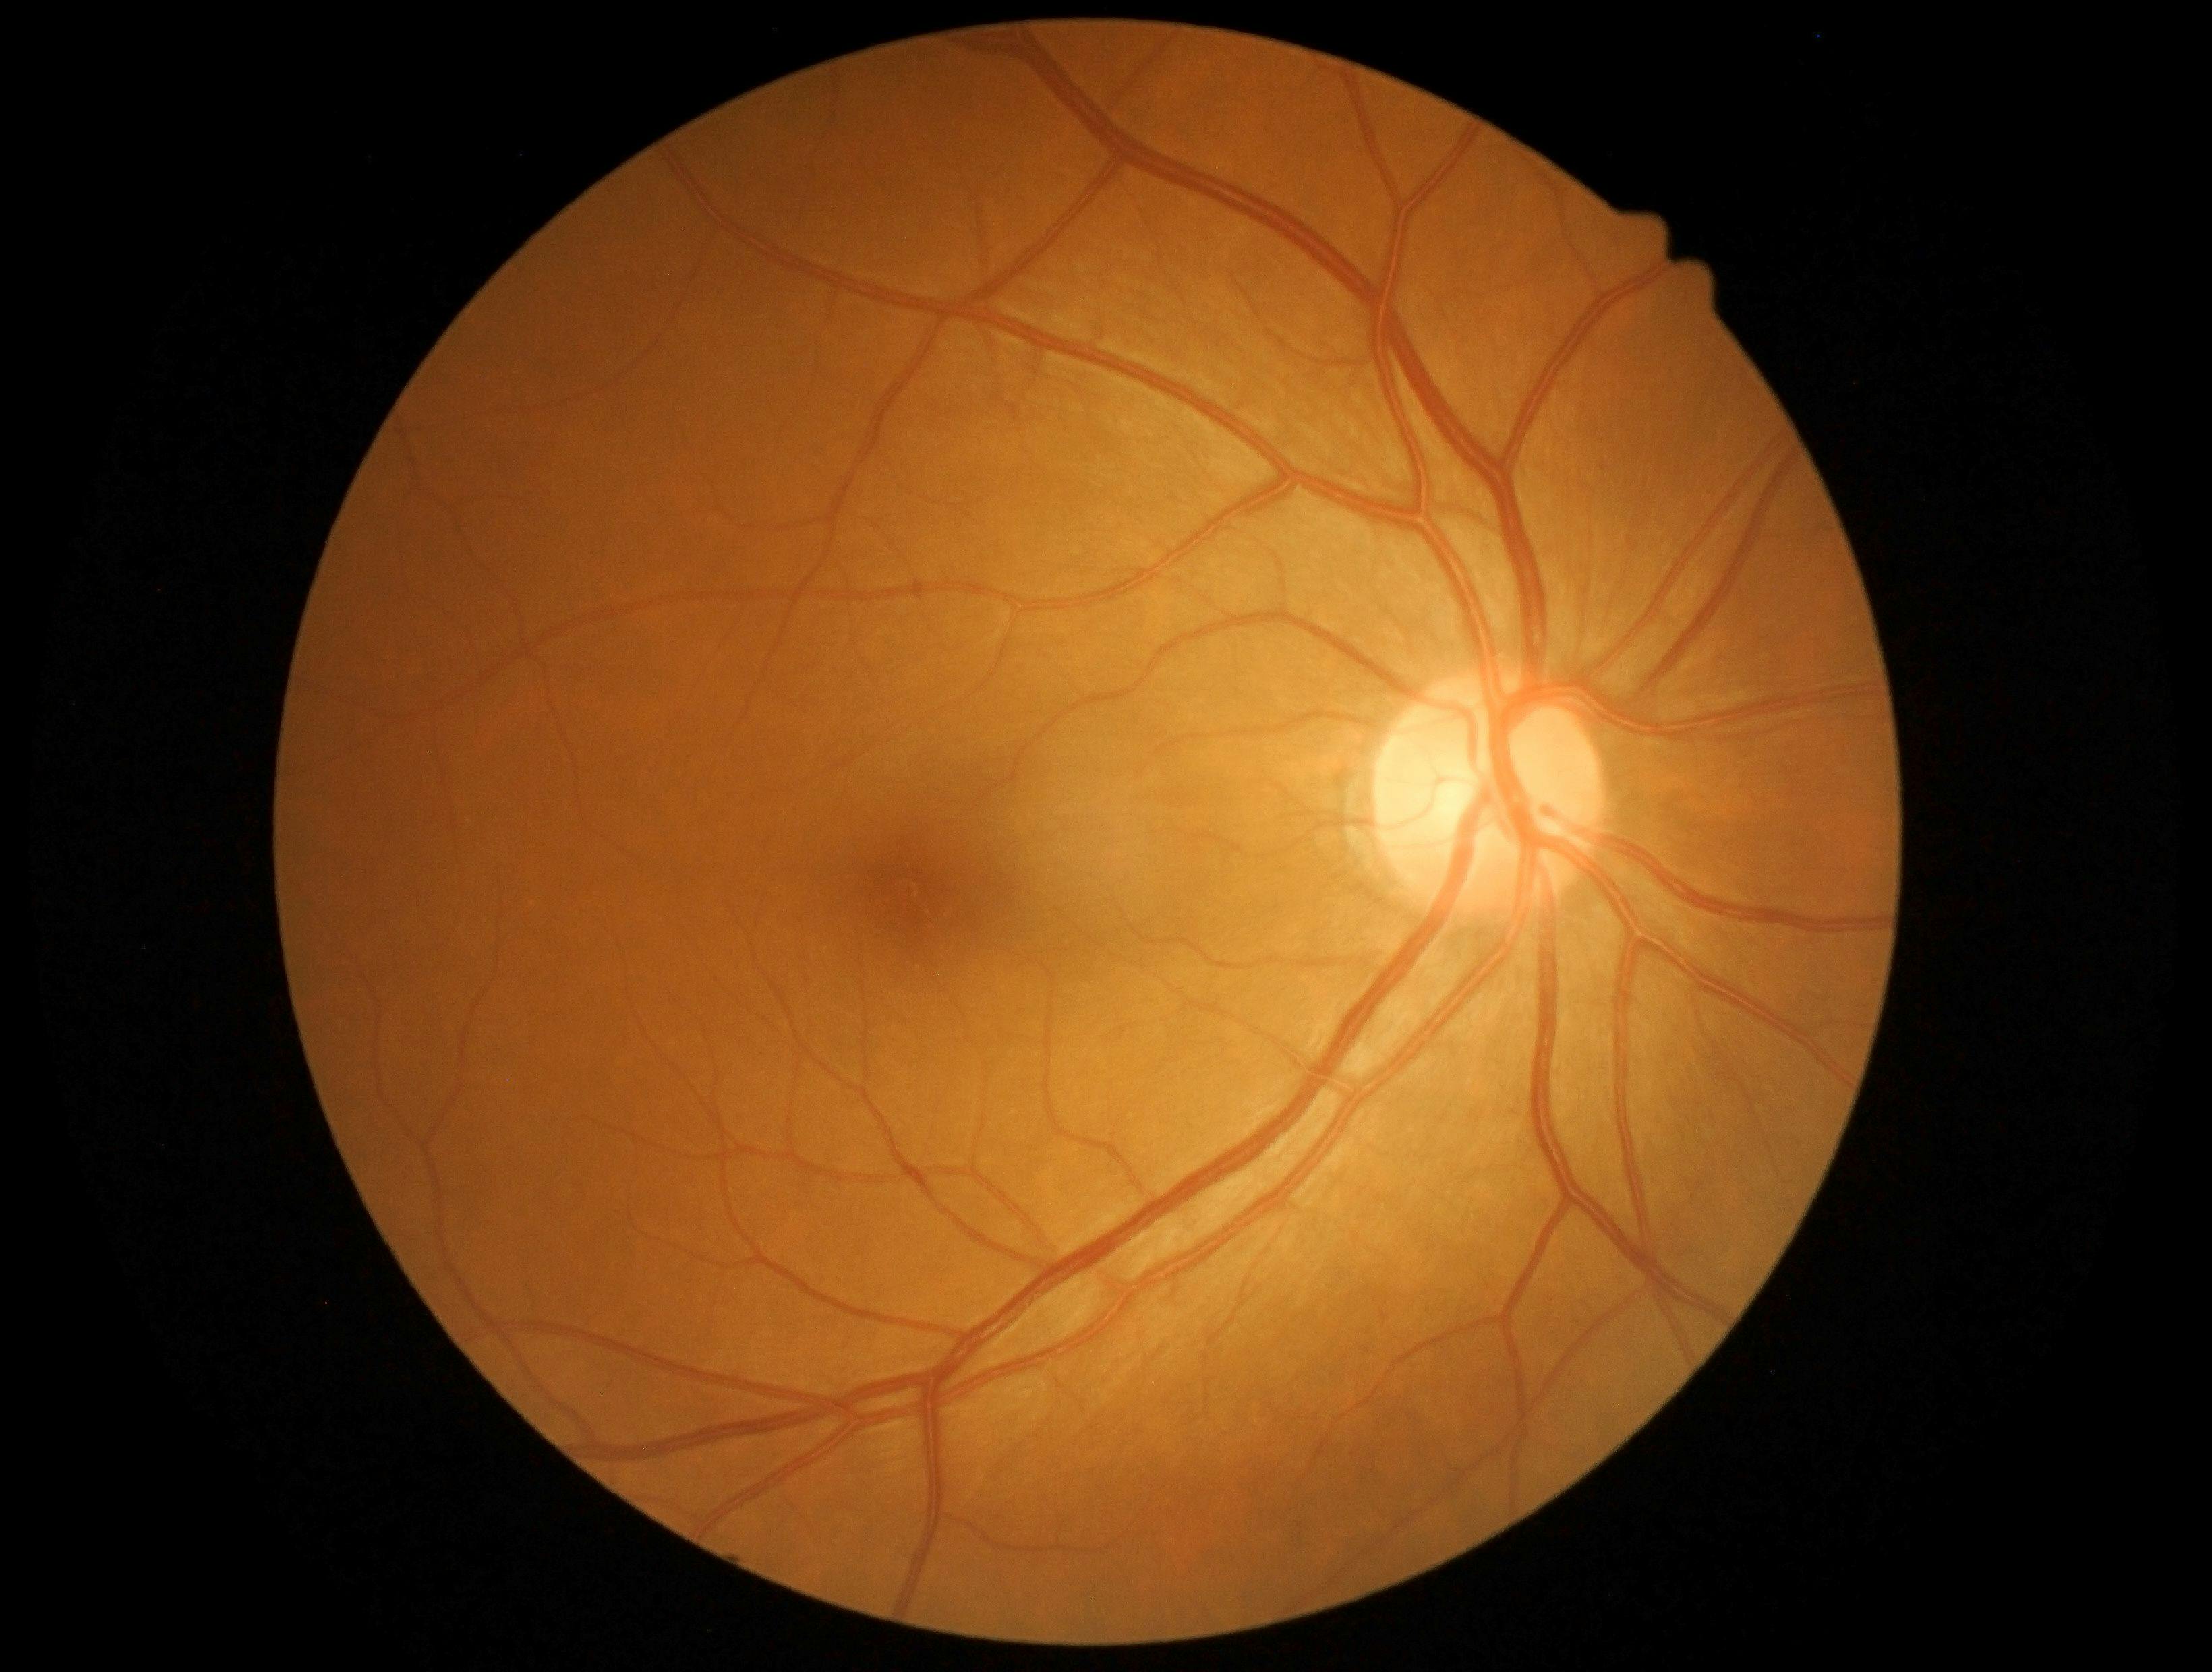 Measuring the Optic Nerve Improves Diagnosis of Multiple Sclerosis